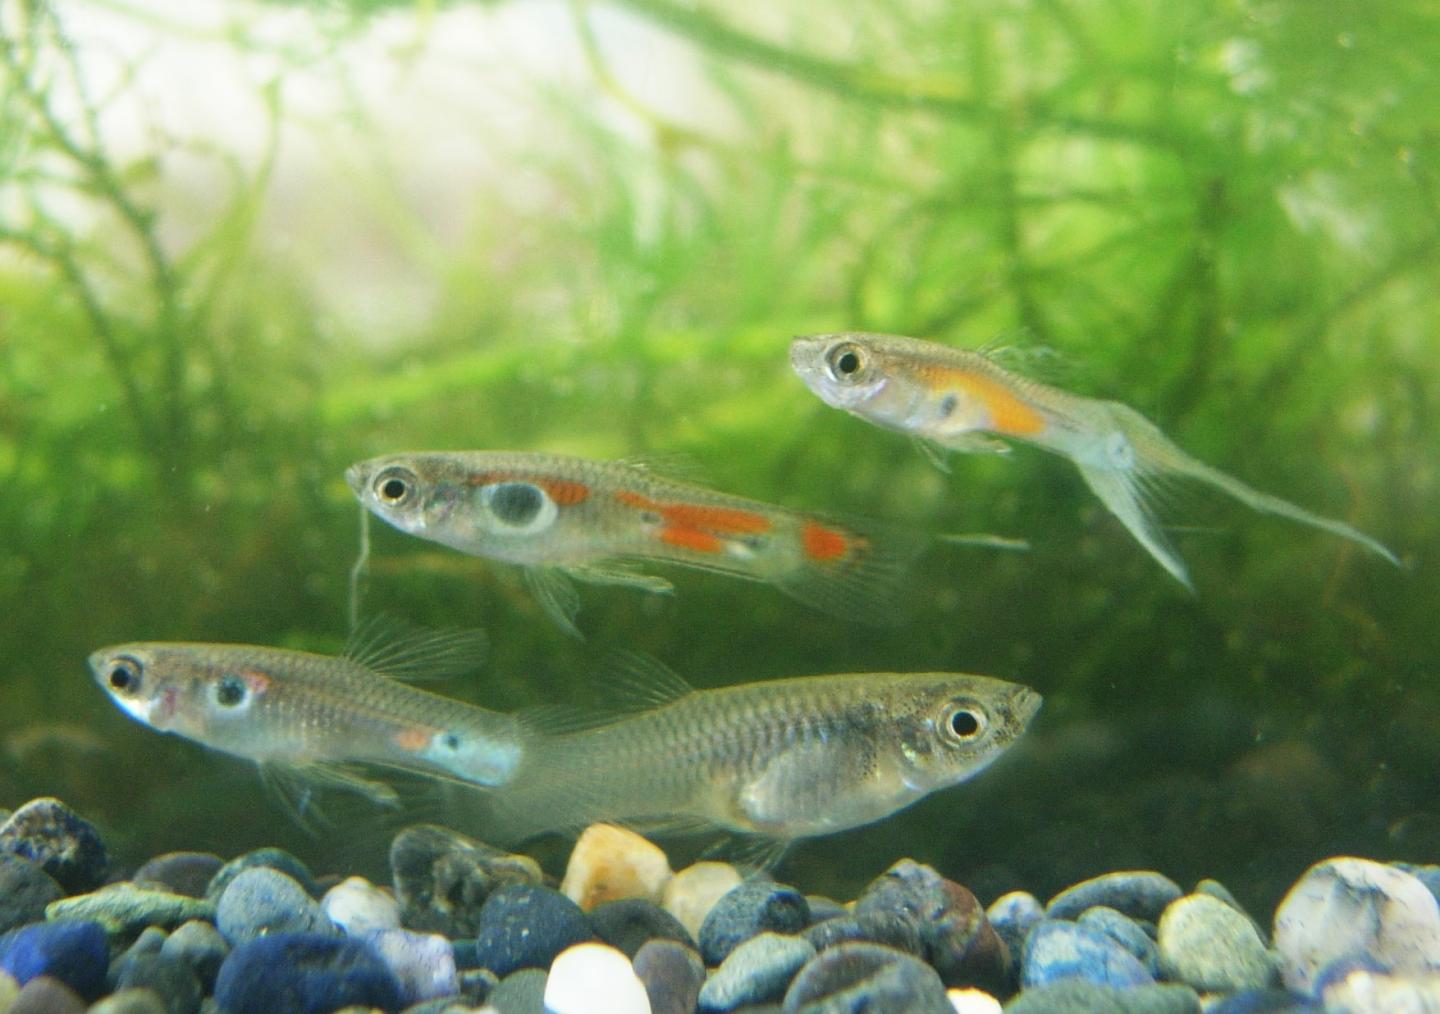 Color Vision Variation in Guppies Influences Female Mate Preference